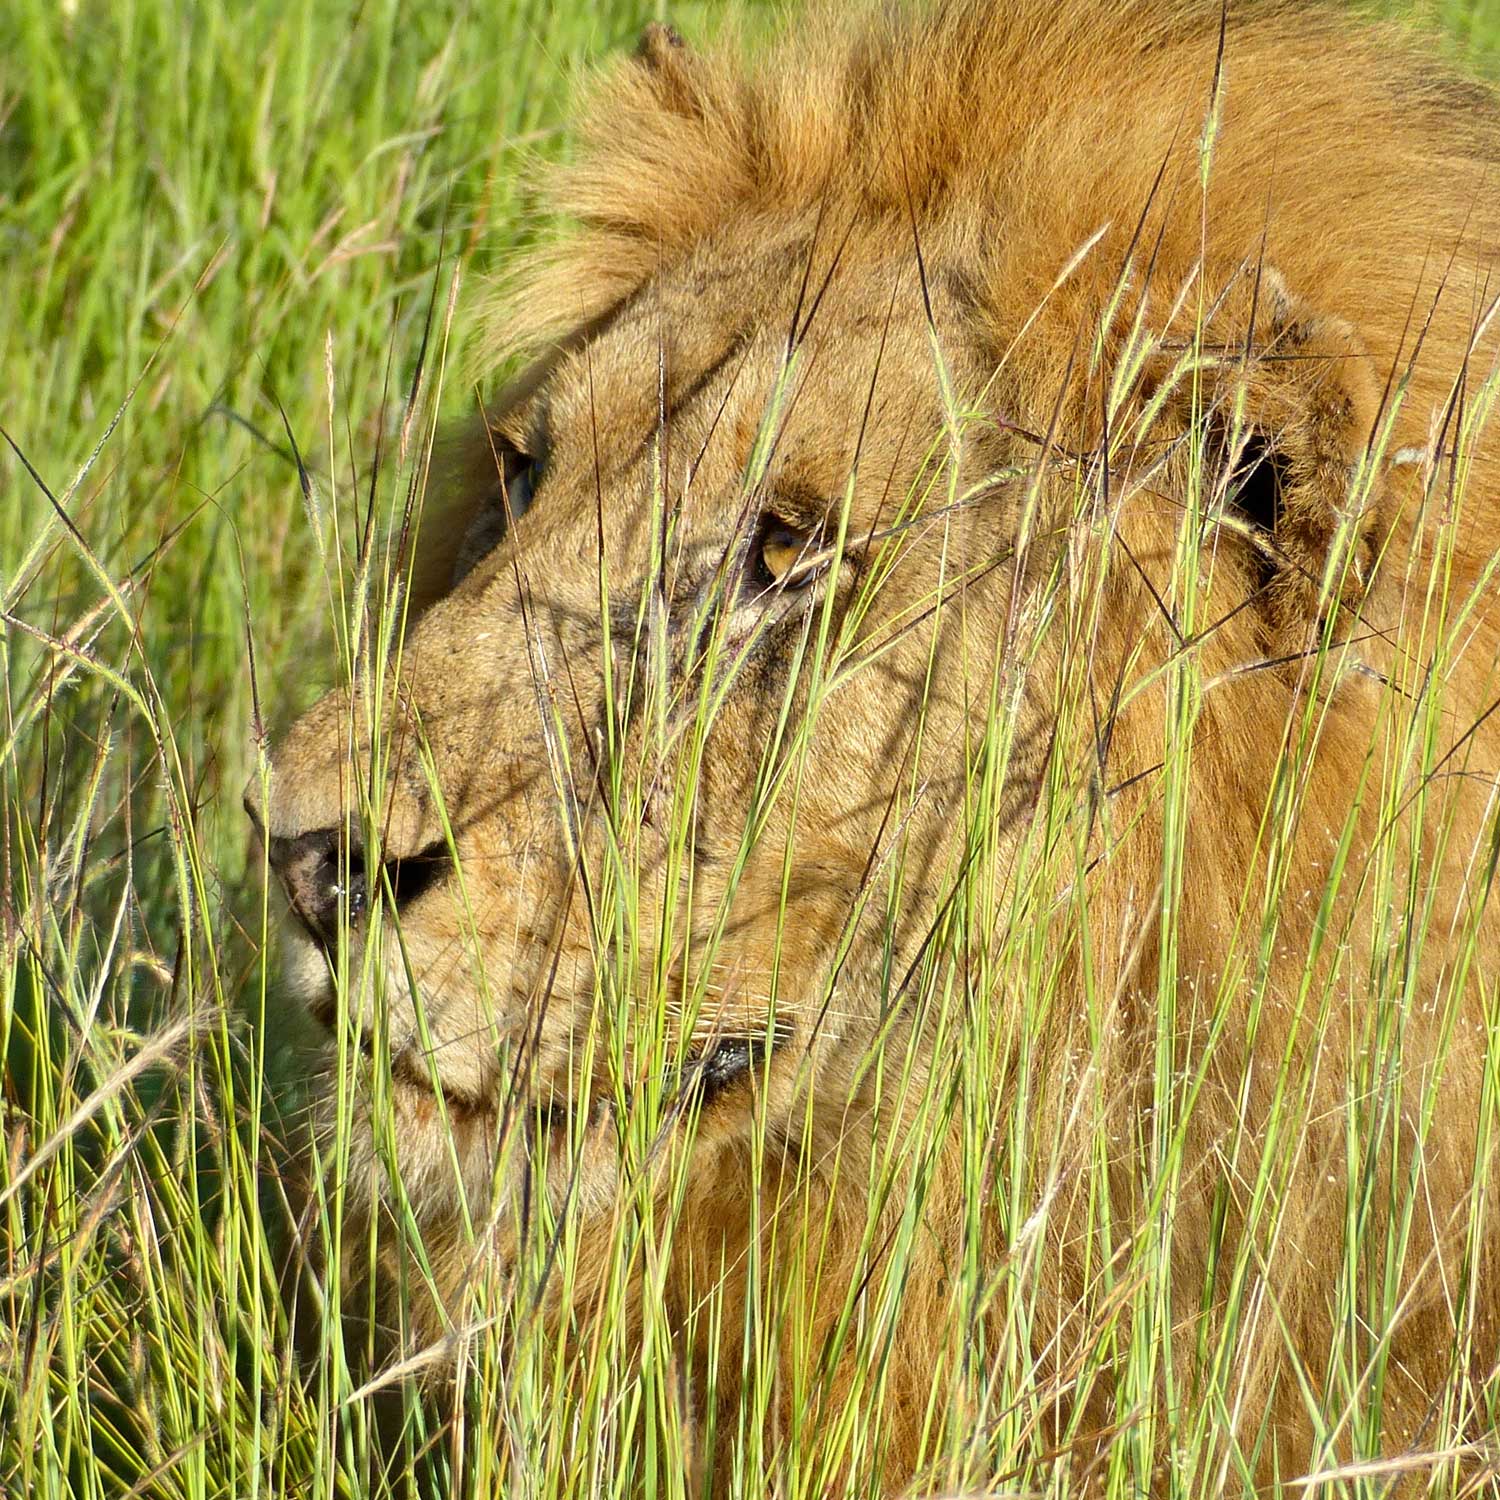 A close-up photograph of a lion laying in a field of grass that includes tanglehead.